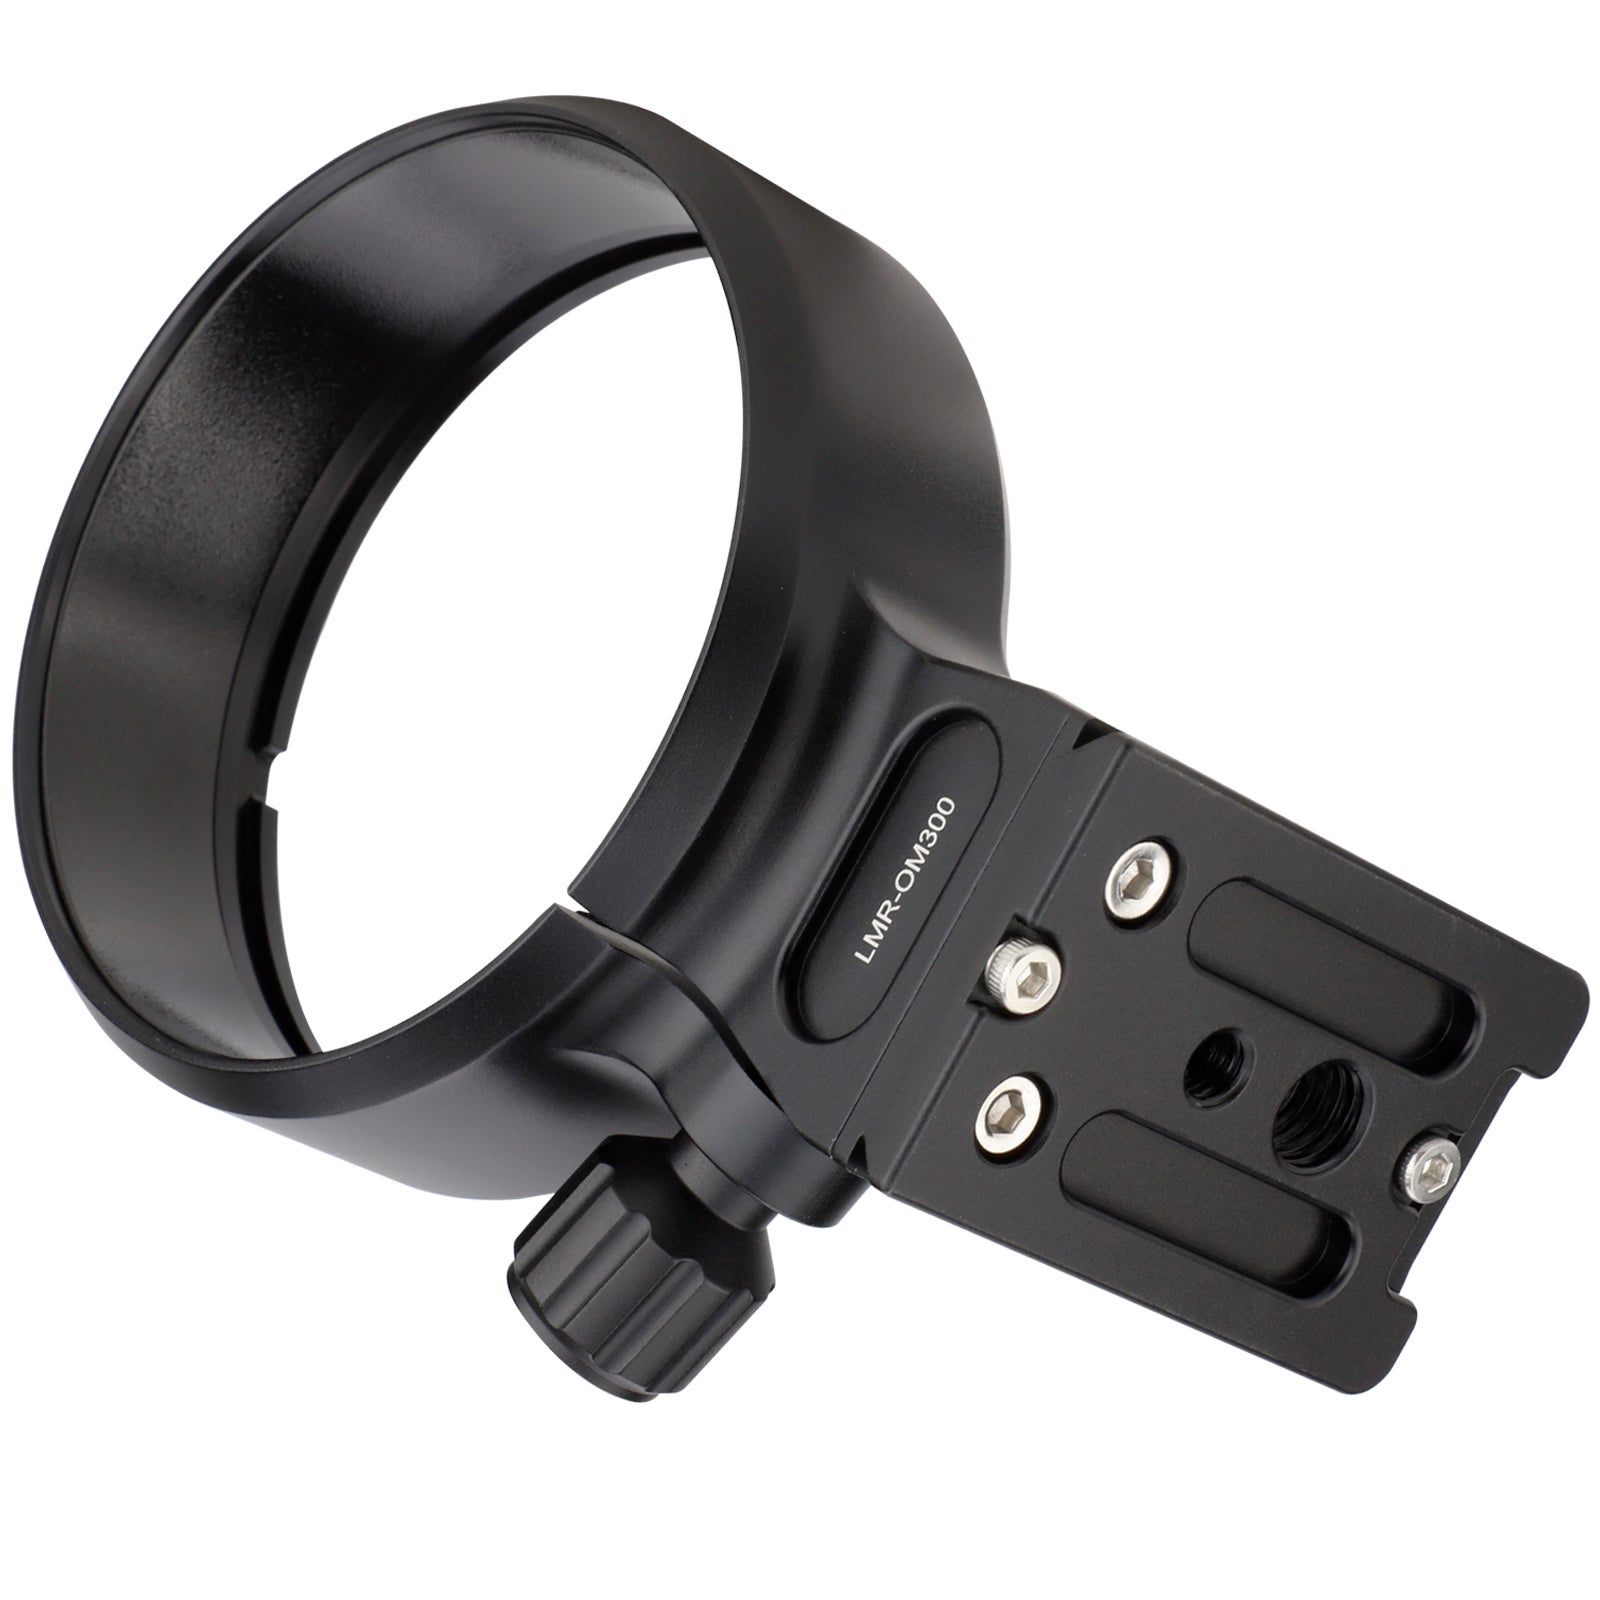 Haoge LMR-OM300 Lens Collar Tripod Mount Ring for Olympus M.ZUIKO DIGITAL ED 300mm F4.0 IS PRO Lens  built-in Arca Type Quick Release Plate